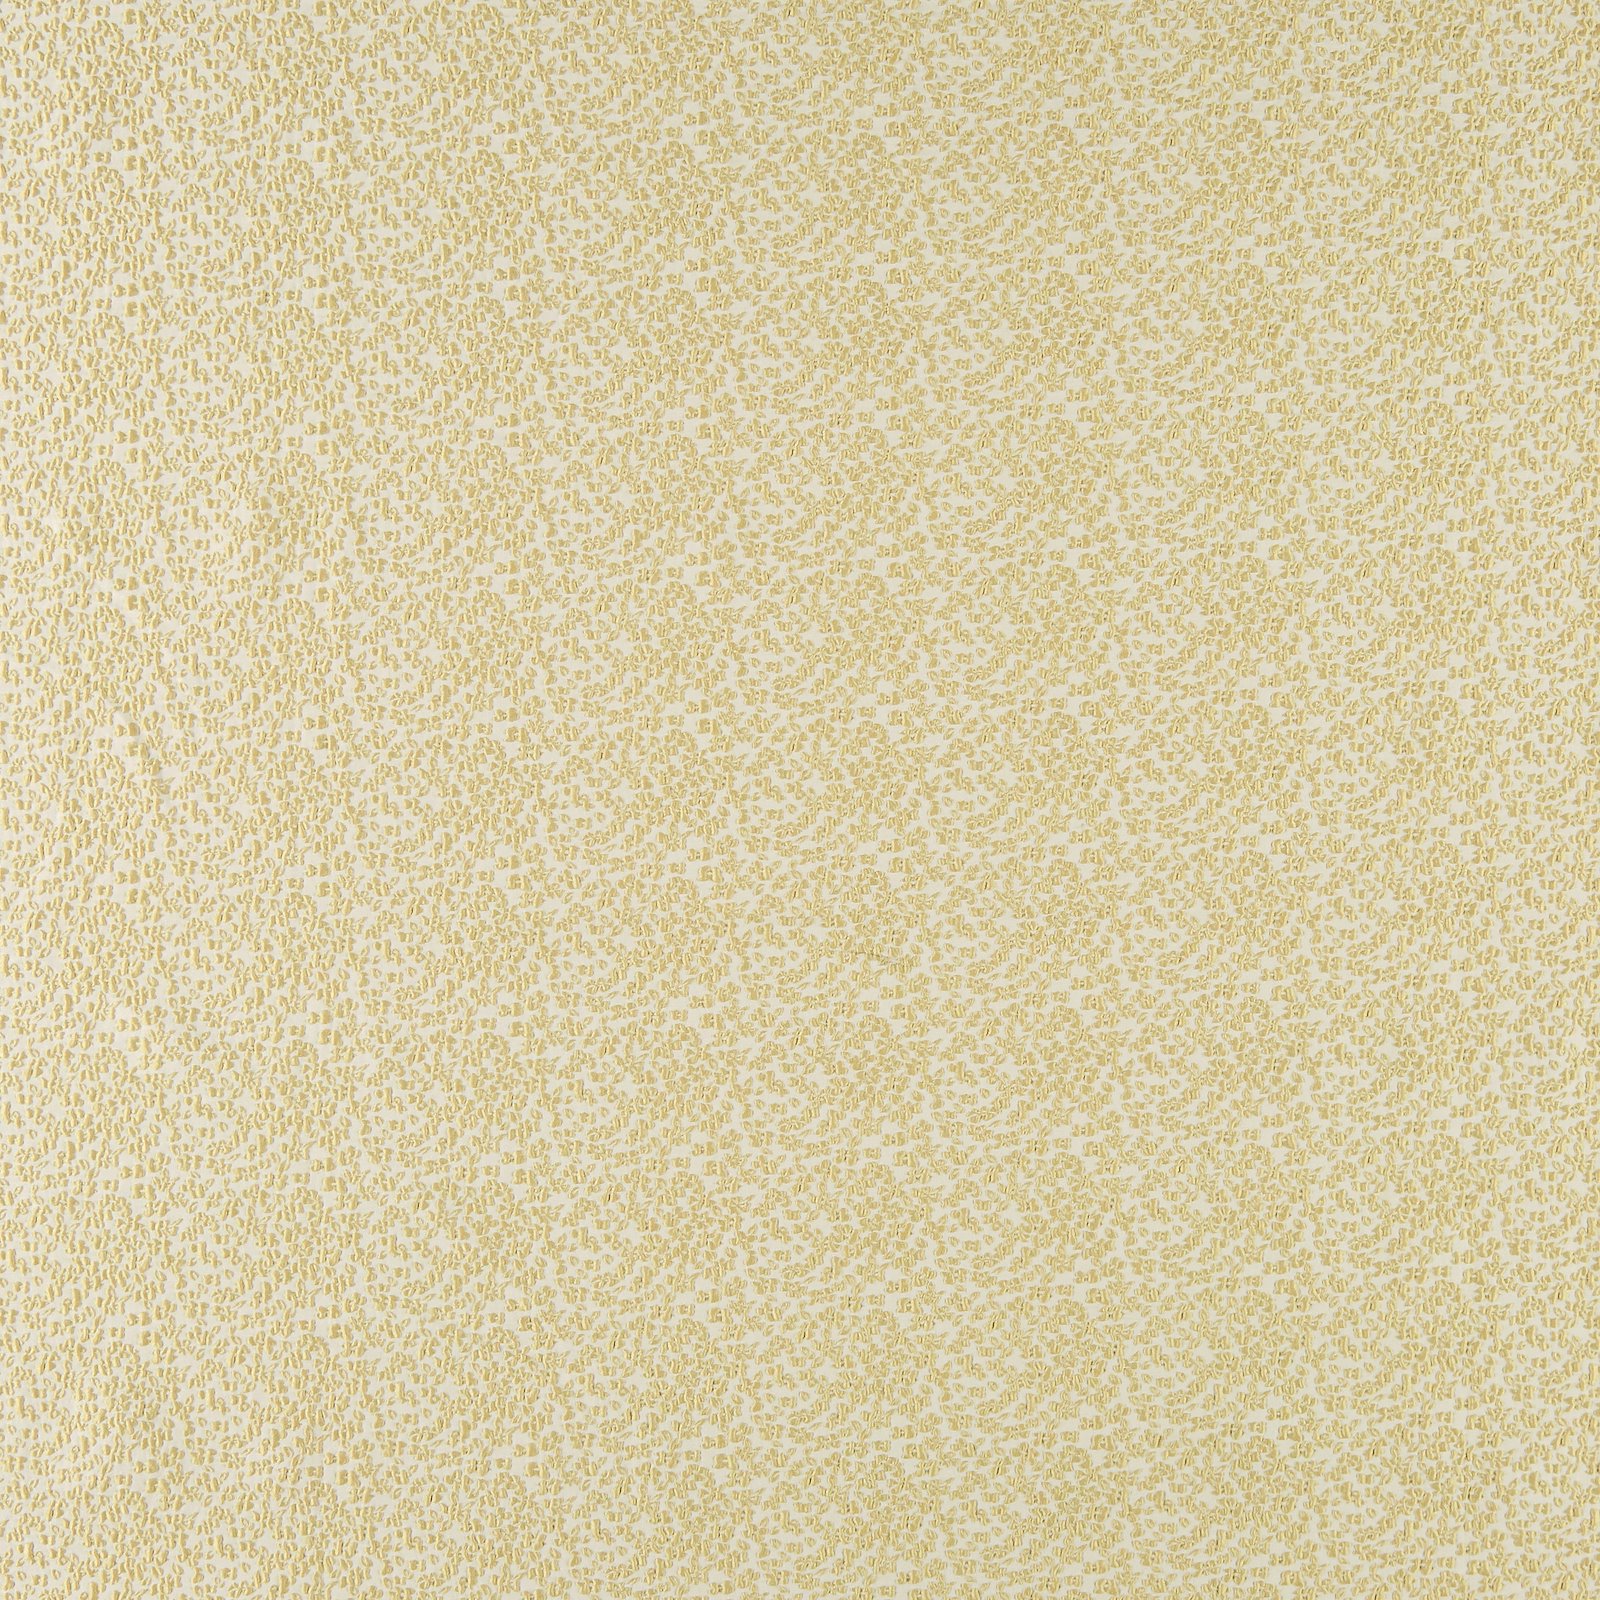 Woven jacquard lght olive yellow pattern 400365_pack_sp